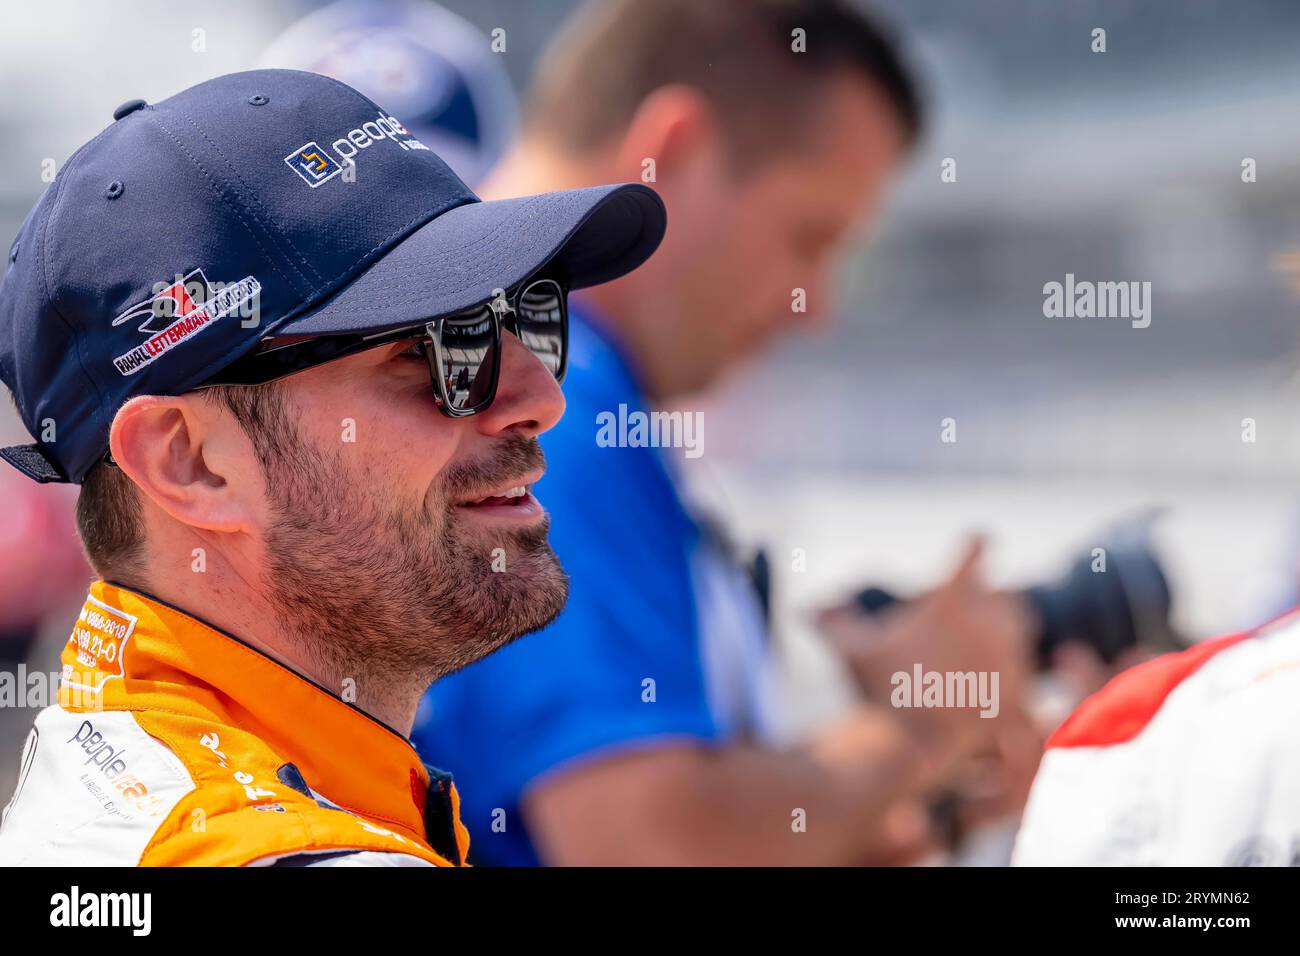 INDYCAR Series: May 18 Indianapols 500 Stock Photo